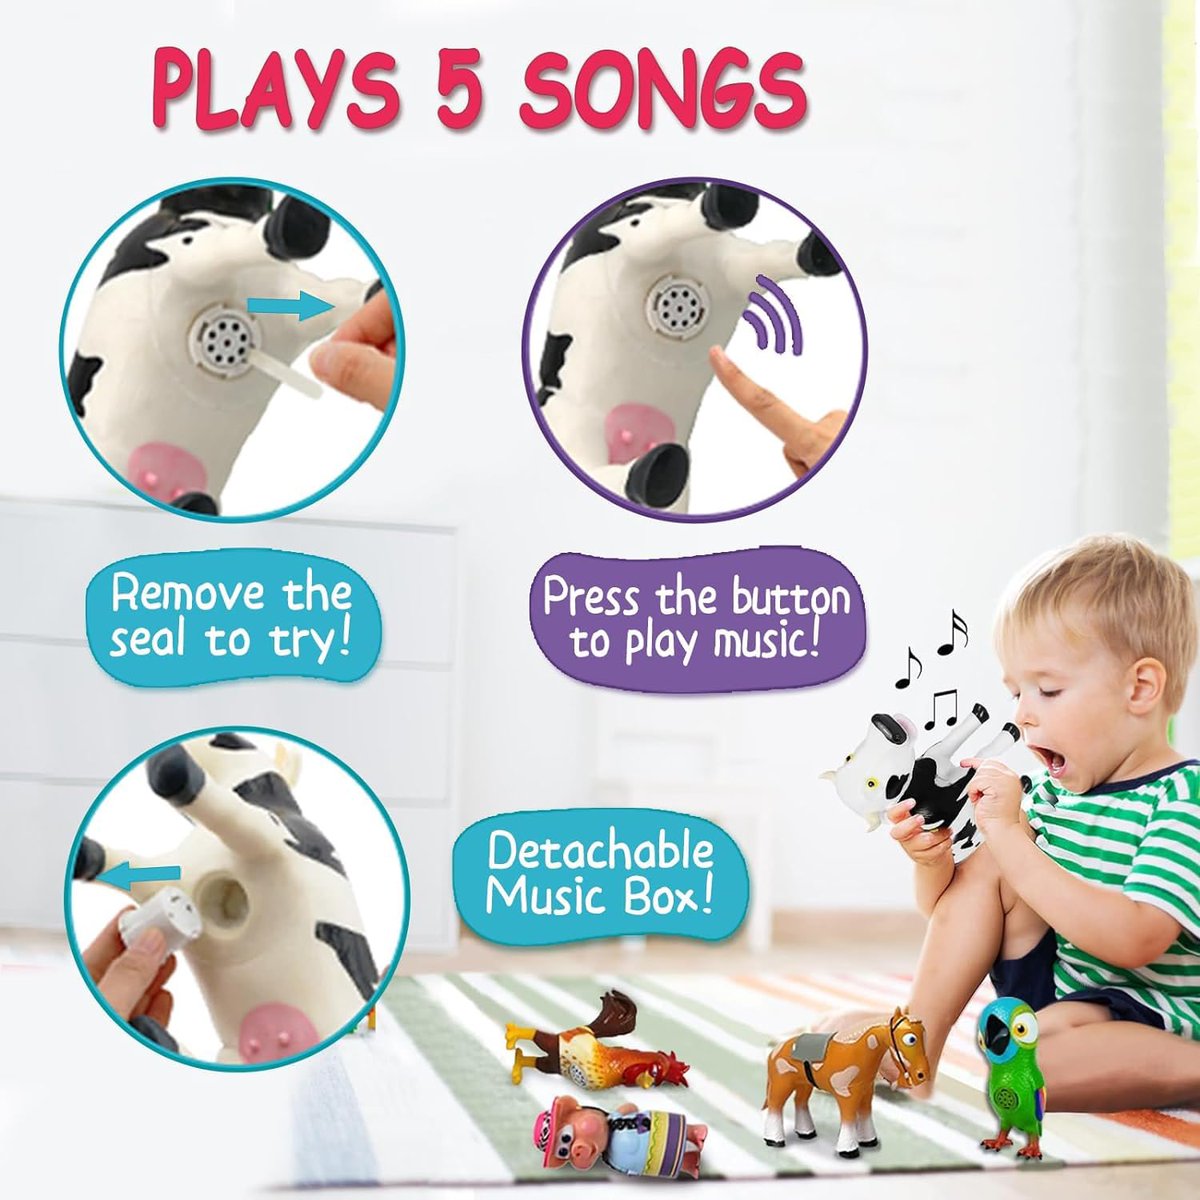 🎶🐮 Farmyard Melodies: Cute Cow Toy That Plays Classic Tunes for Toddlers! #fyp #LaGranjaDeZenon #VacaLola #BabyToys #MusicalToy